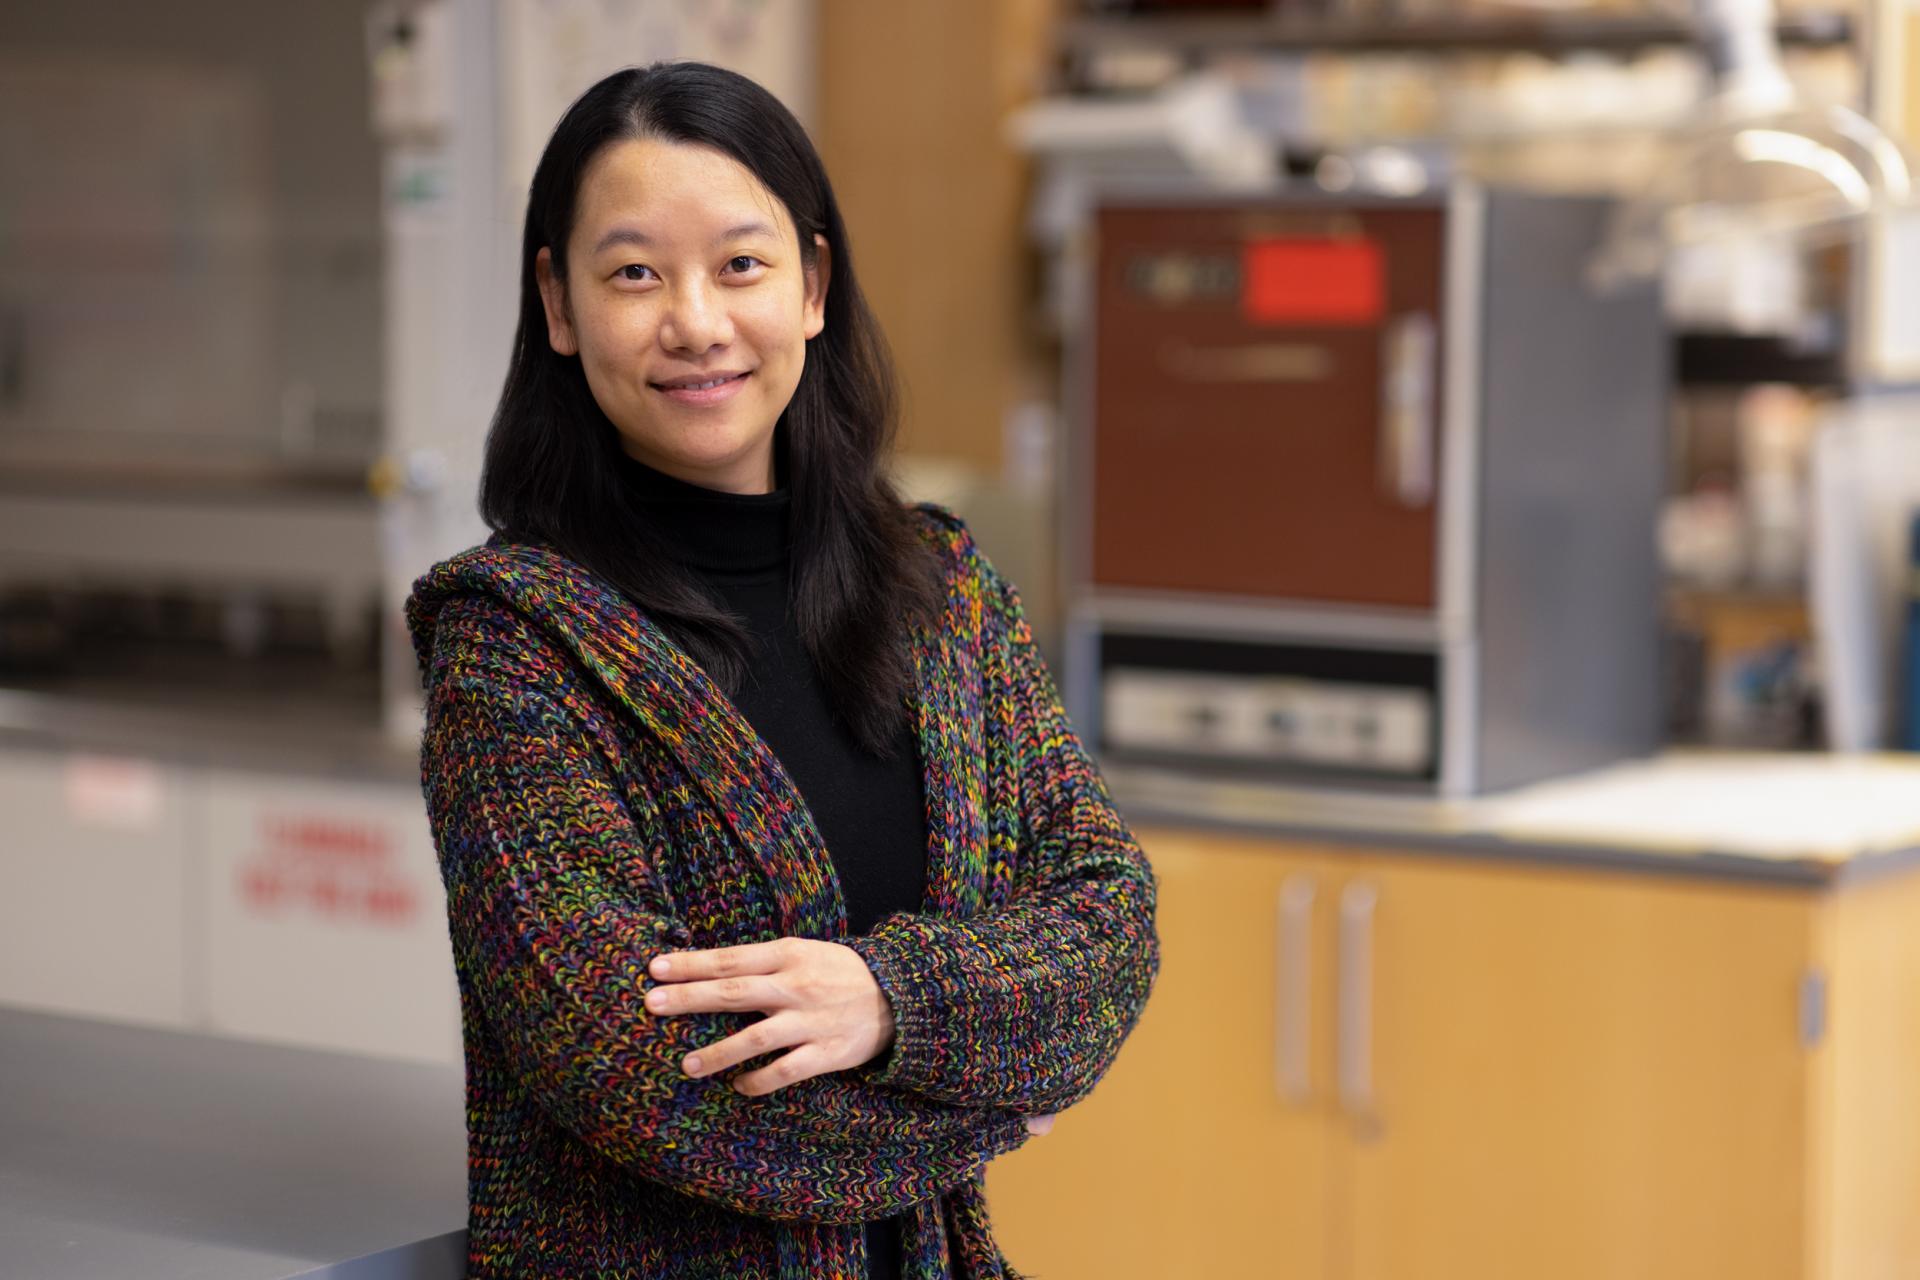 Professor Xue Pan in a sweater standing in a lab